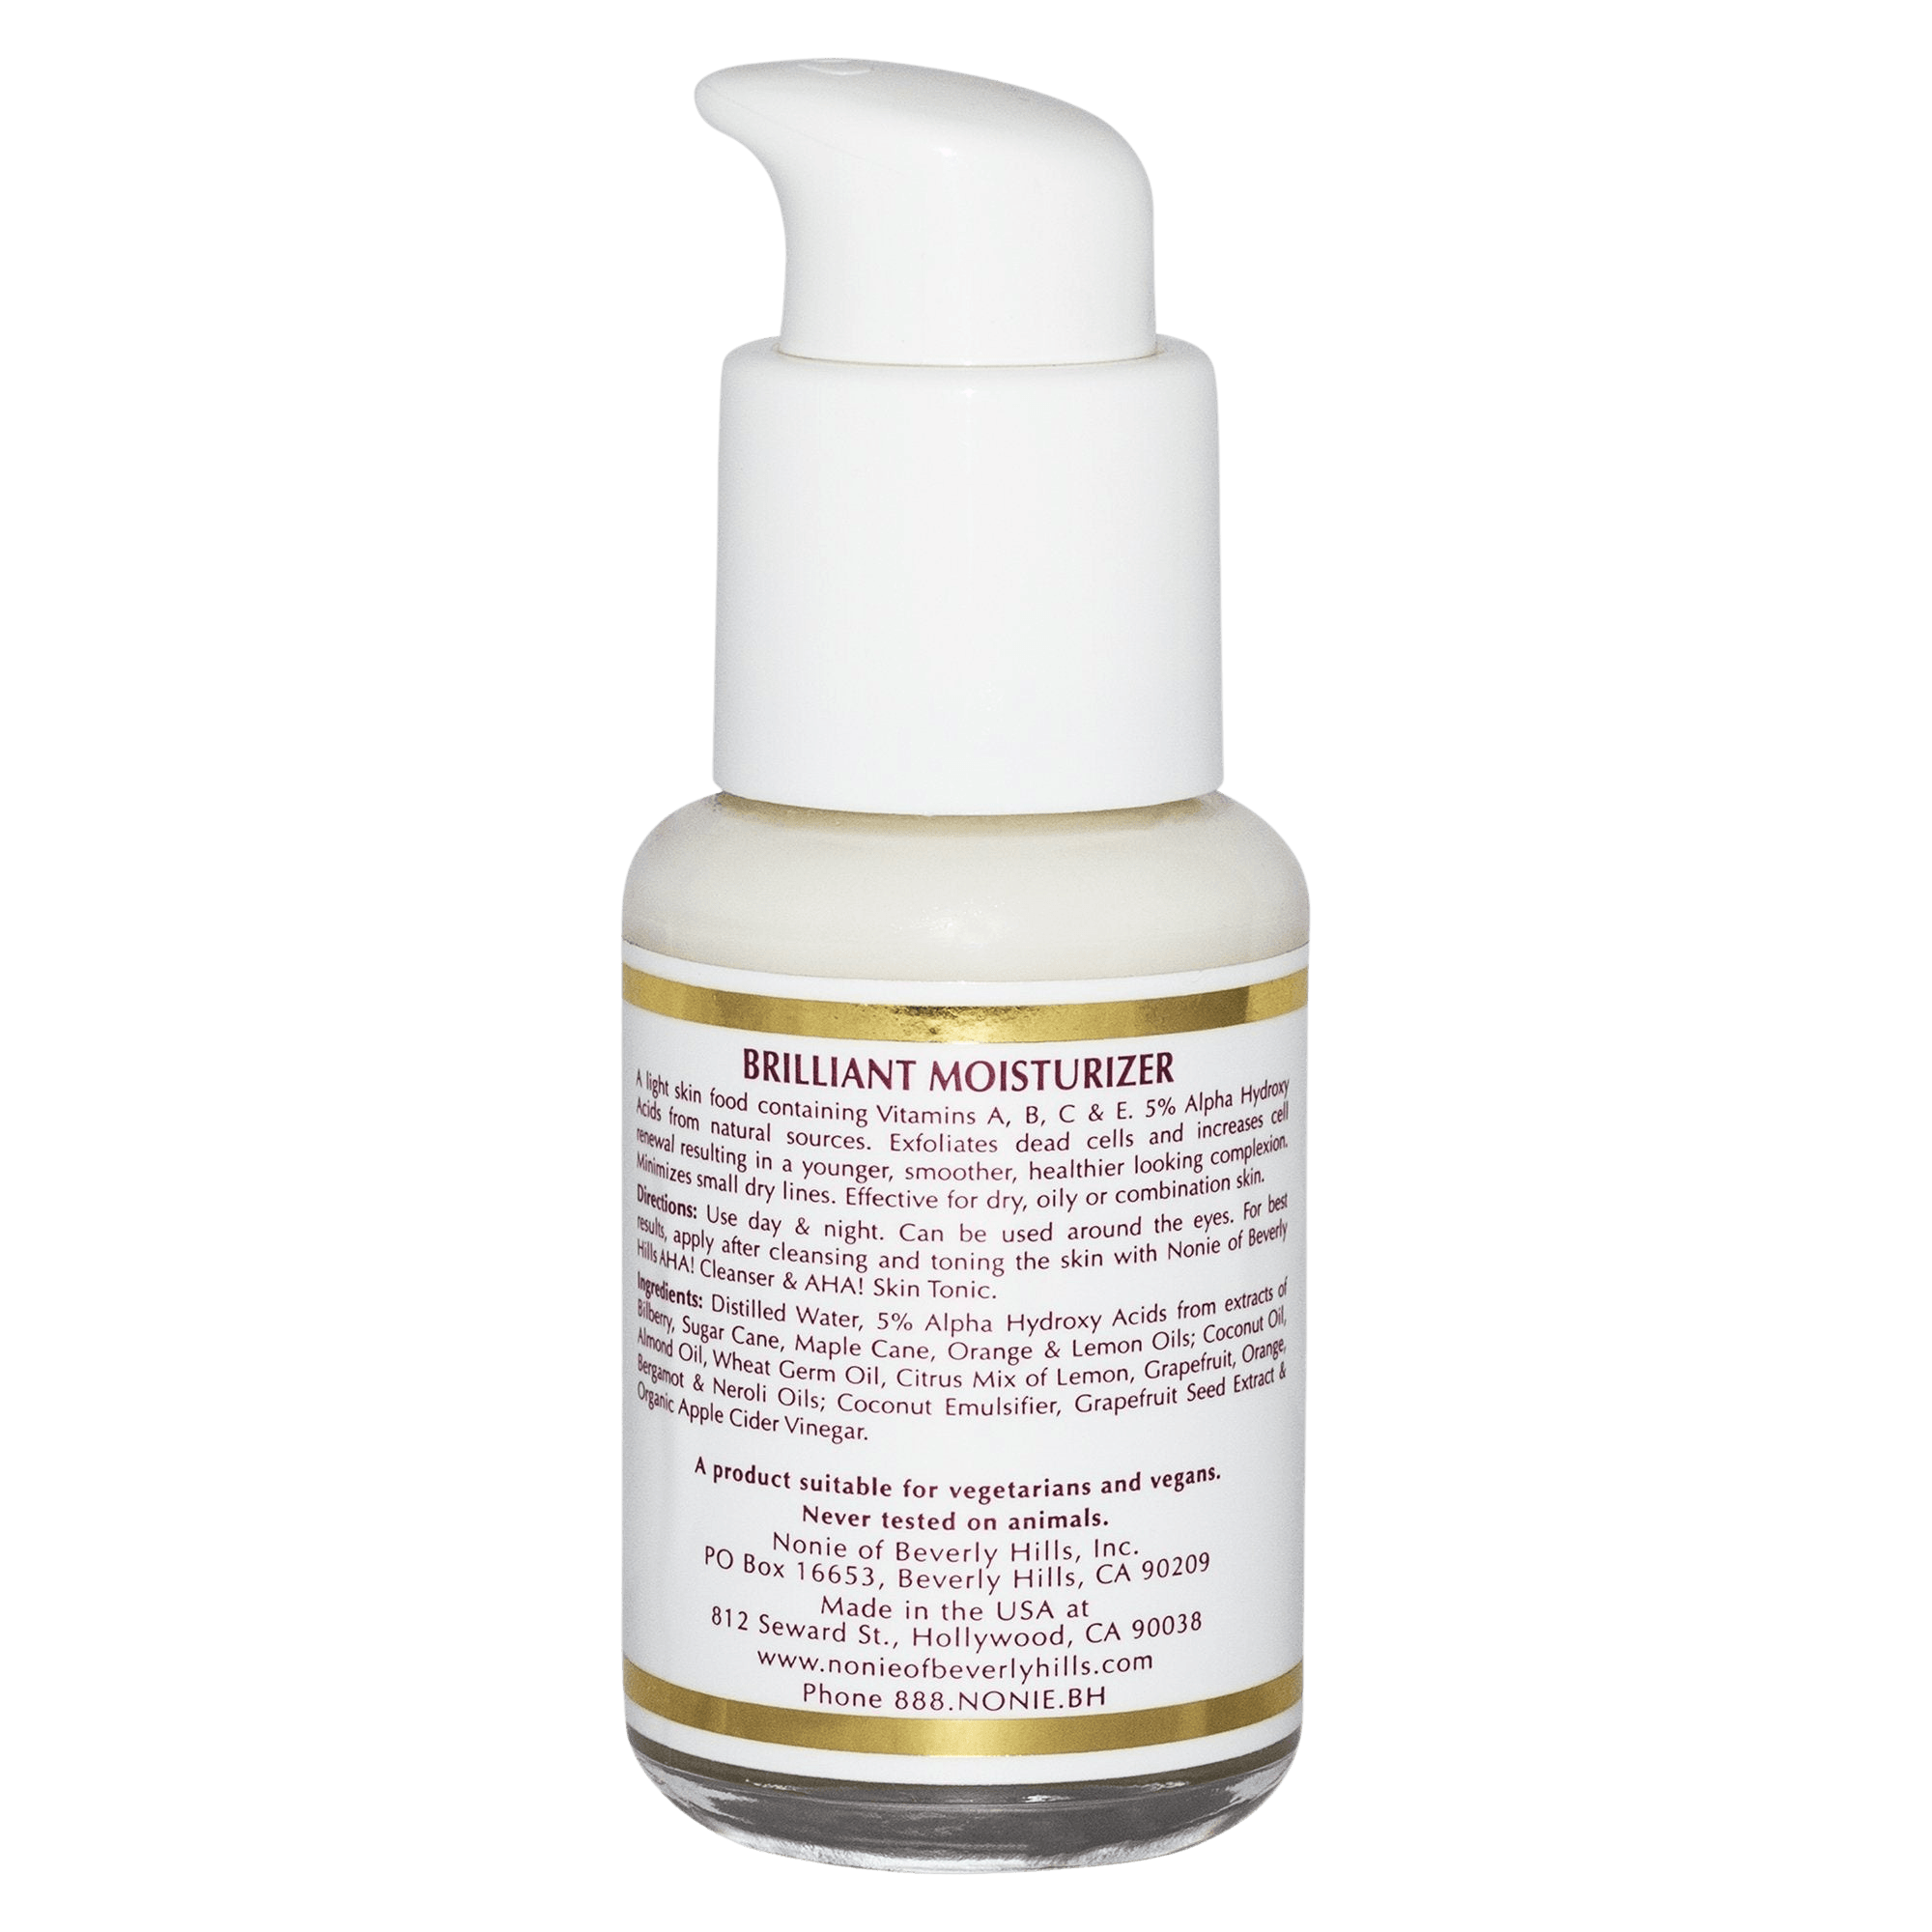 AHA! Brilliant Moisturizer 1.75 oz - for Normal/Combination Skin - Nonie of Beverly Hills